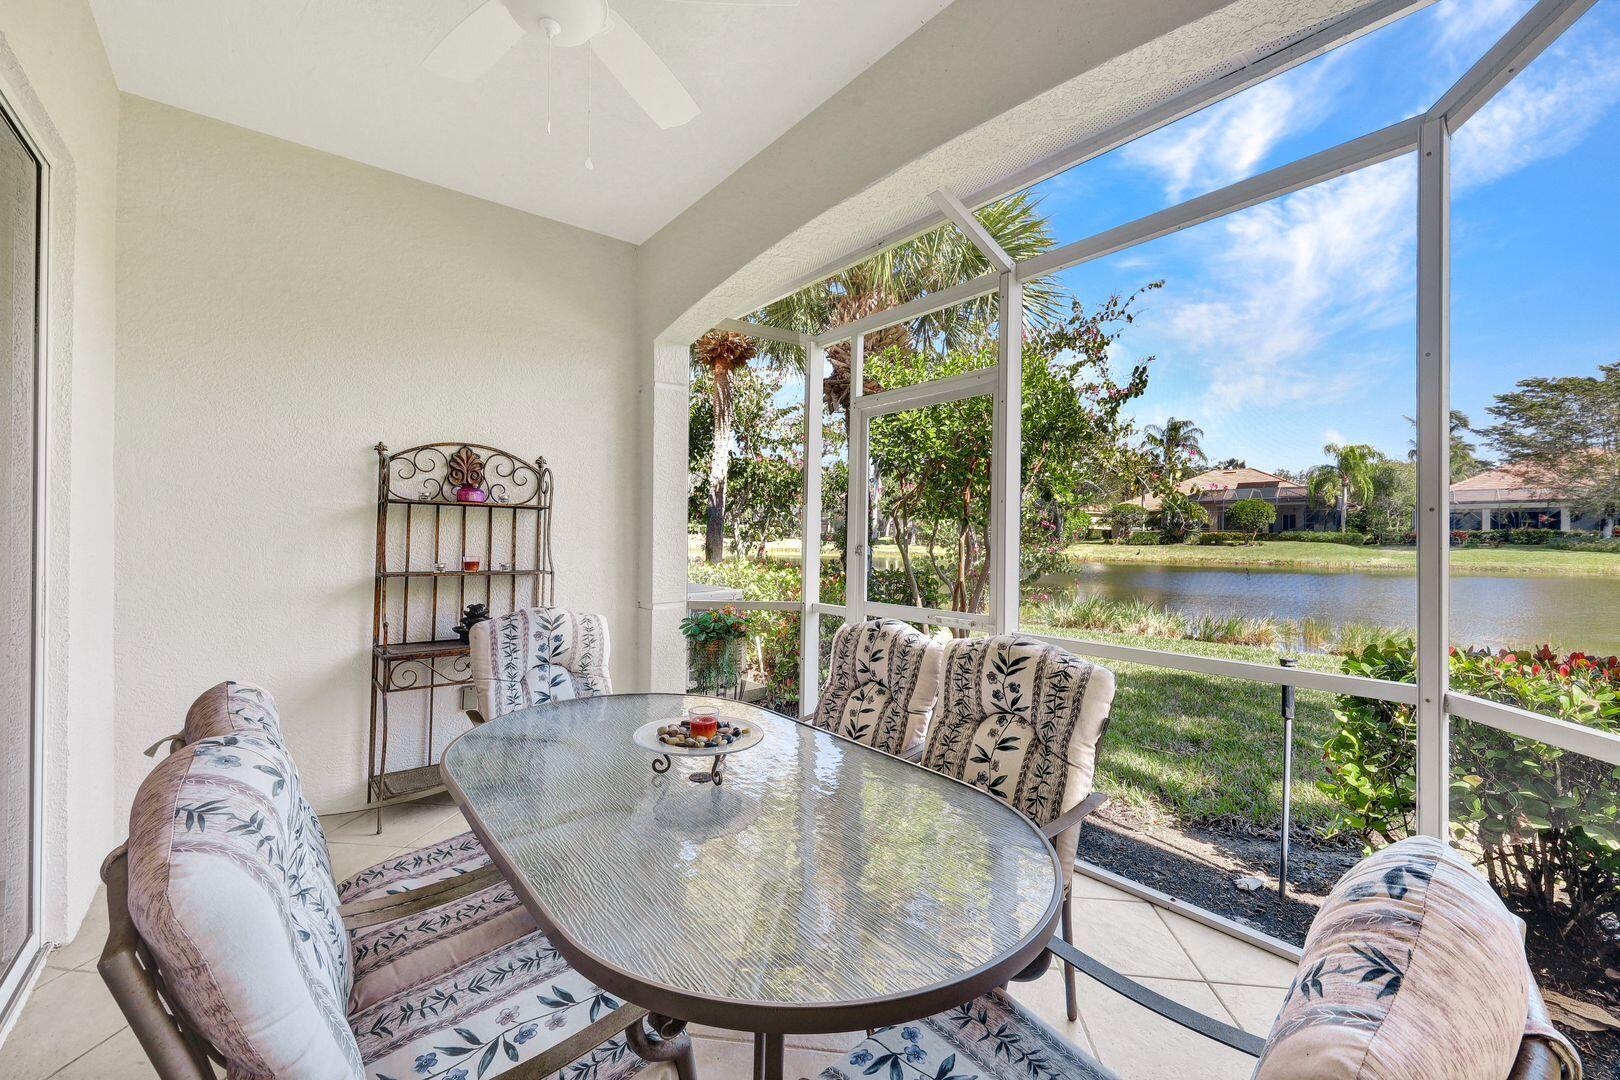 4522 Cardinal Cove Lane, Naples, Florida, 34114, United States, 2 Bedrooms Bedrooms, ,2 BathroomsBathrooms,Residential,For Sale,4522 Cardinal Cove Lane,1472032